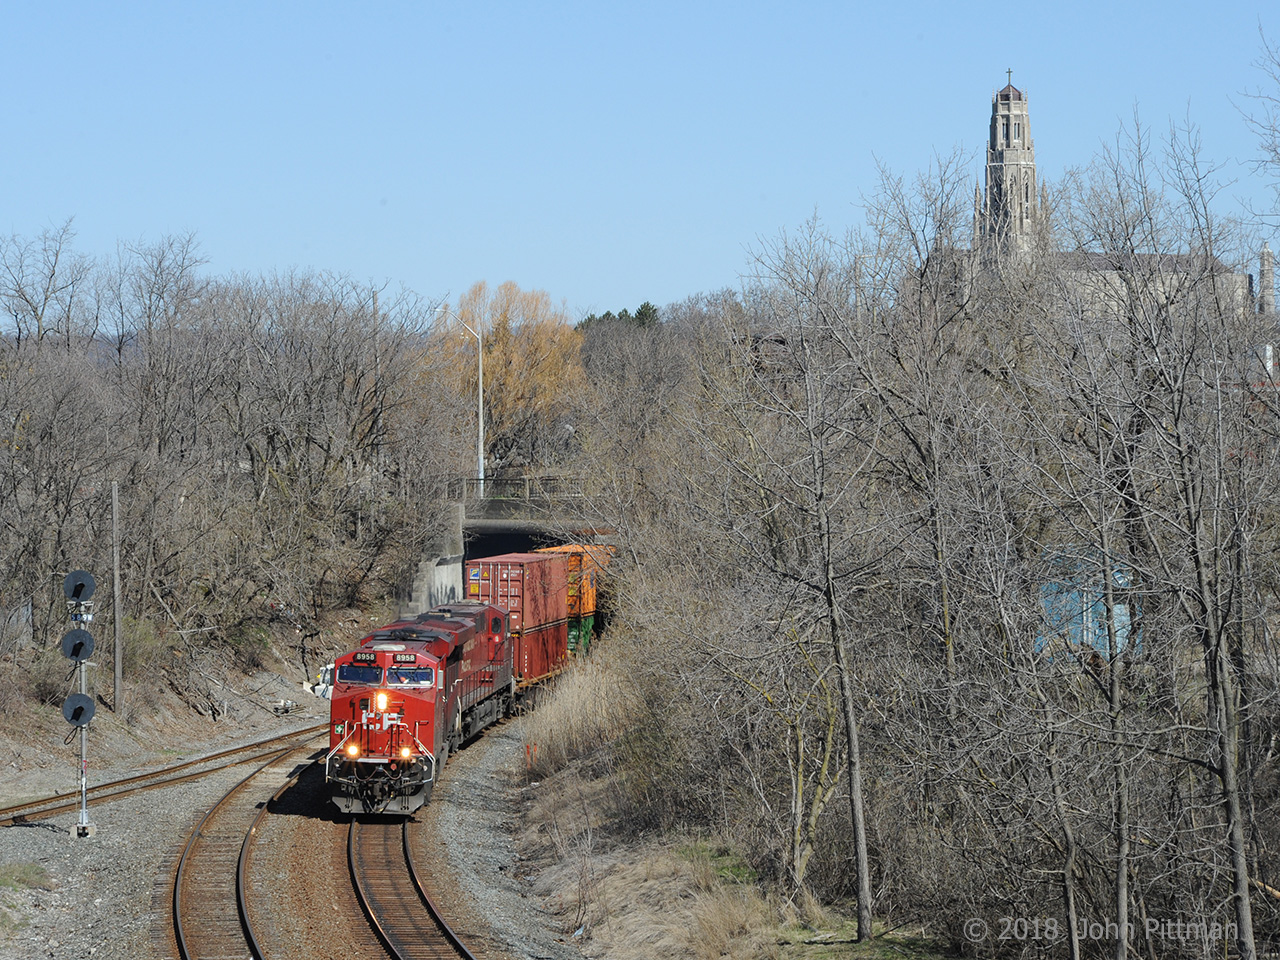 CP 8958 and CP 8815 are leading mixed freight train 246 south on the former TH&B under Main Street and into the curve toward the Dundurn Street bridge and Hunter Street tunnel. This is the main line side of the Aberdeen wye. Next stop is Kinnear Yard. 
In the background is Hamilton's RC Cathedral Basilica of Christ the King, completed in 1933. Access to the cathedral campus is by two driveways that cross this same railway line on bridges.